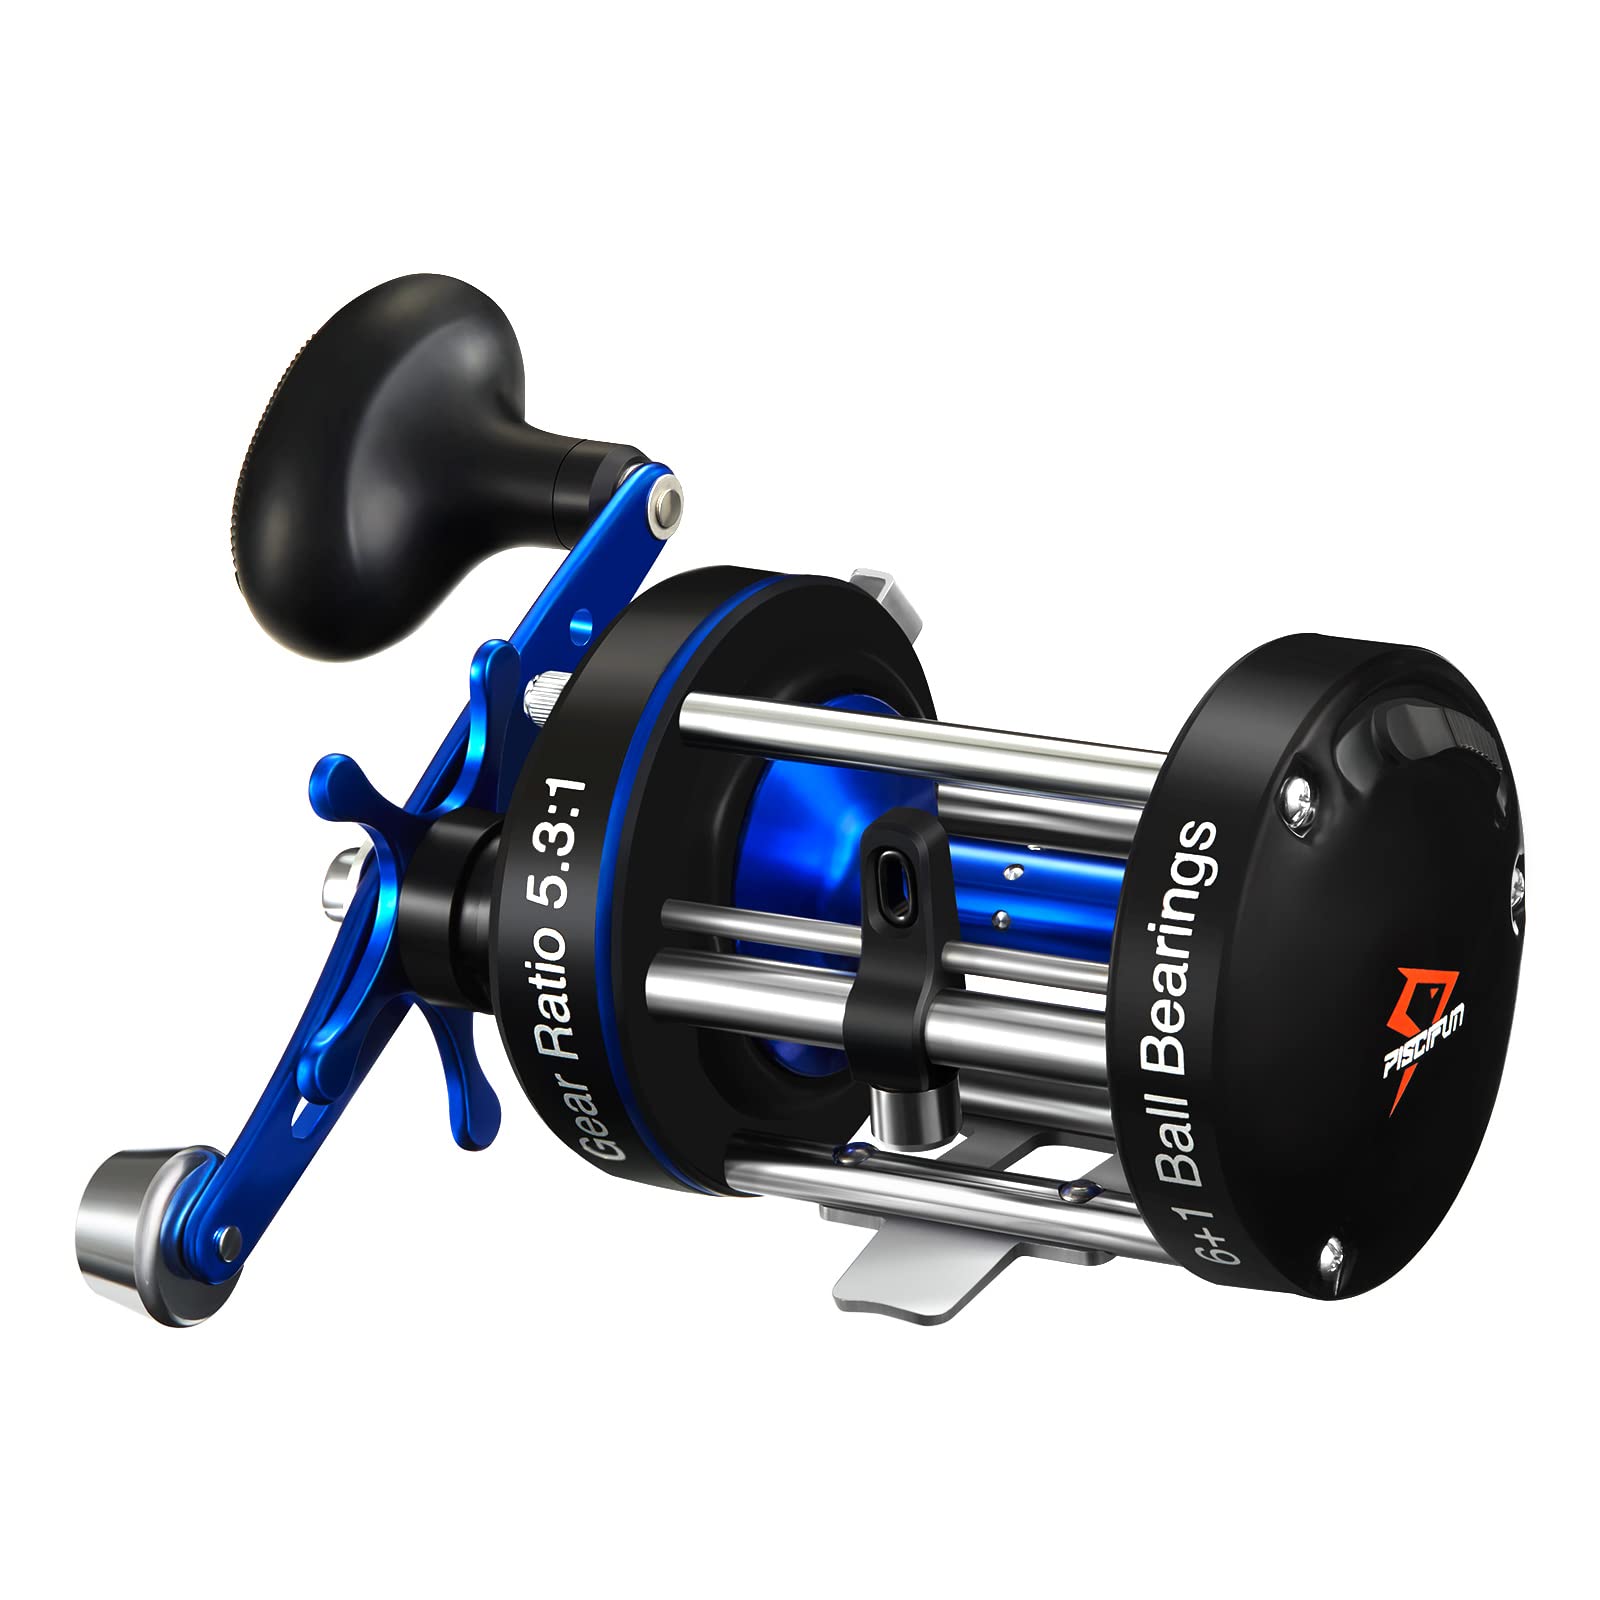 Piscifun Chaos XS Baitcasting Fishing Reel, Reinforced Metal Body Round Baitcaster  Reel, Smooth Powerful Saltwater Inshore Surf Trolling Reel, Conventional  Reel for Catfish, Musky, Bass, Pike Blue 60 Right Hand Retrieve